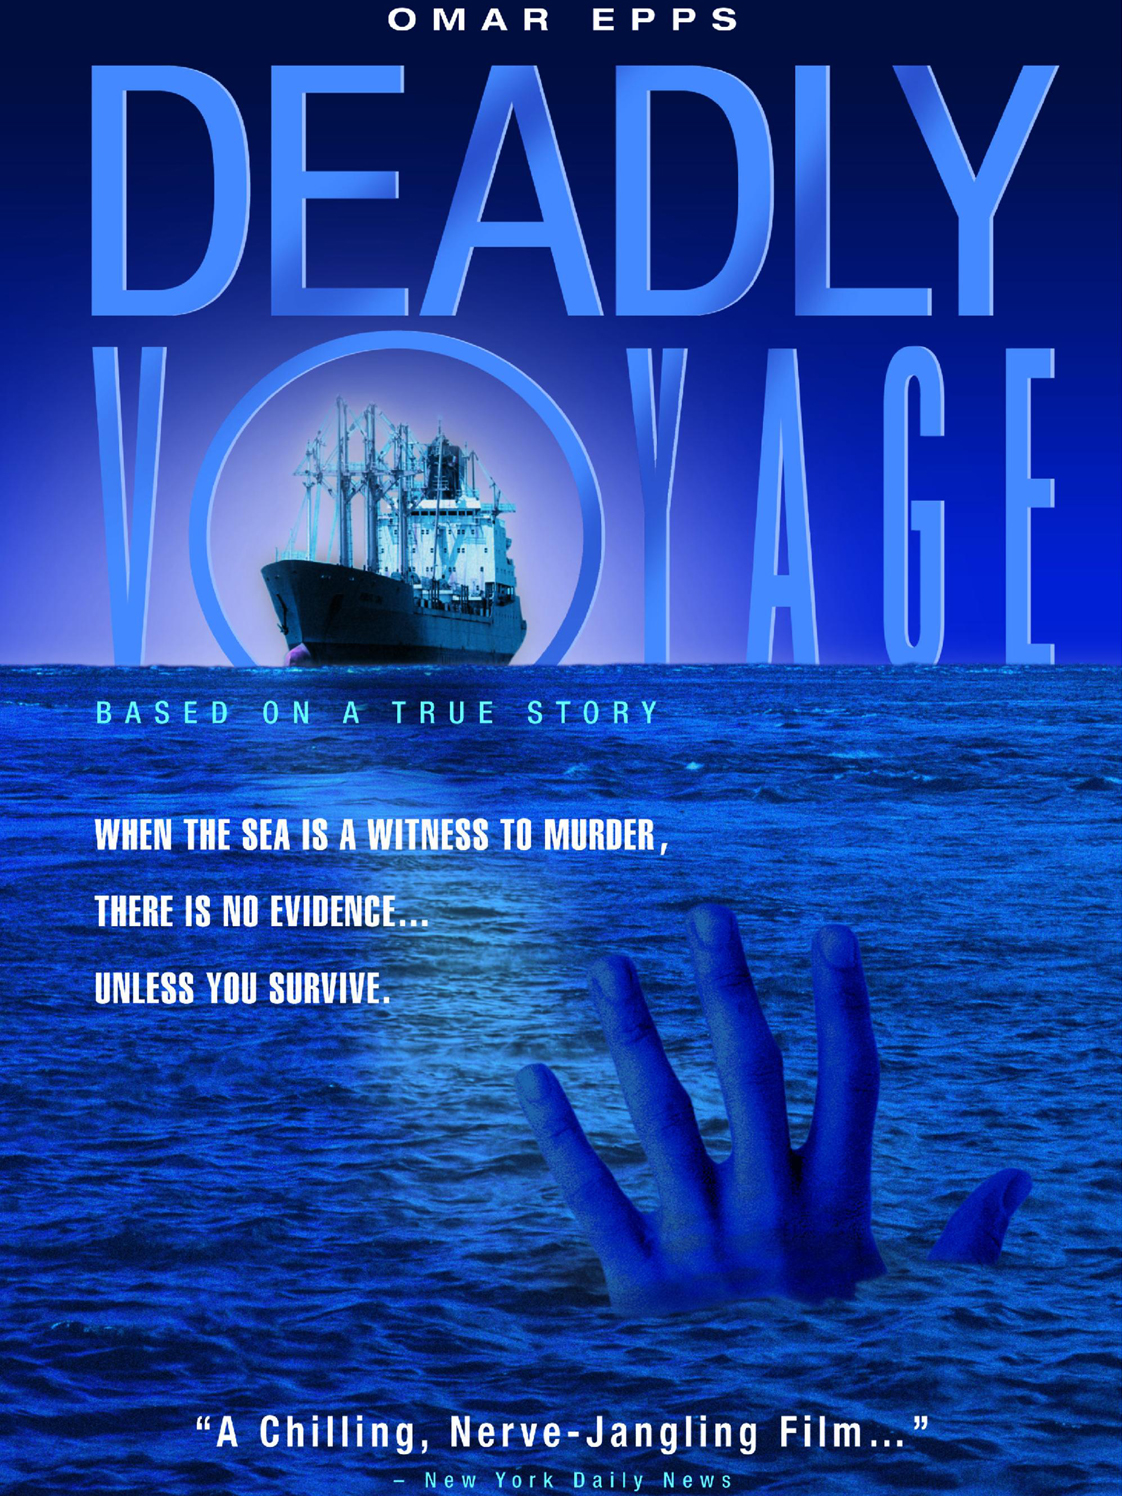 deadly voyage download